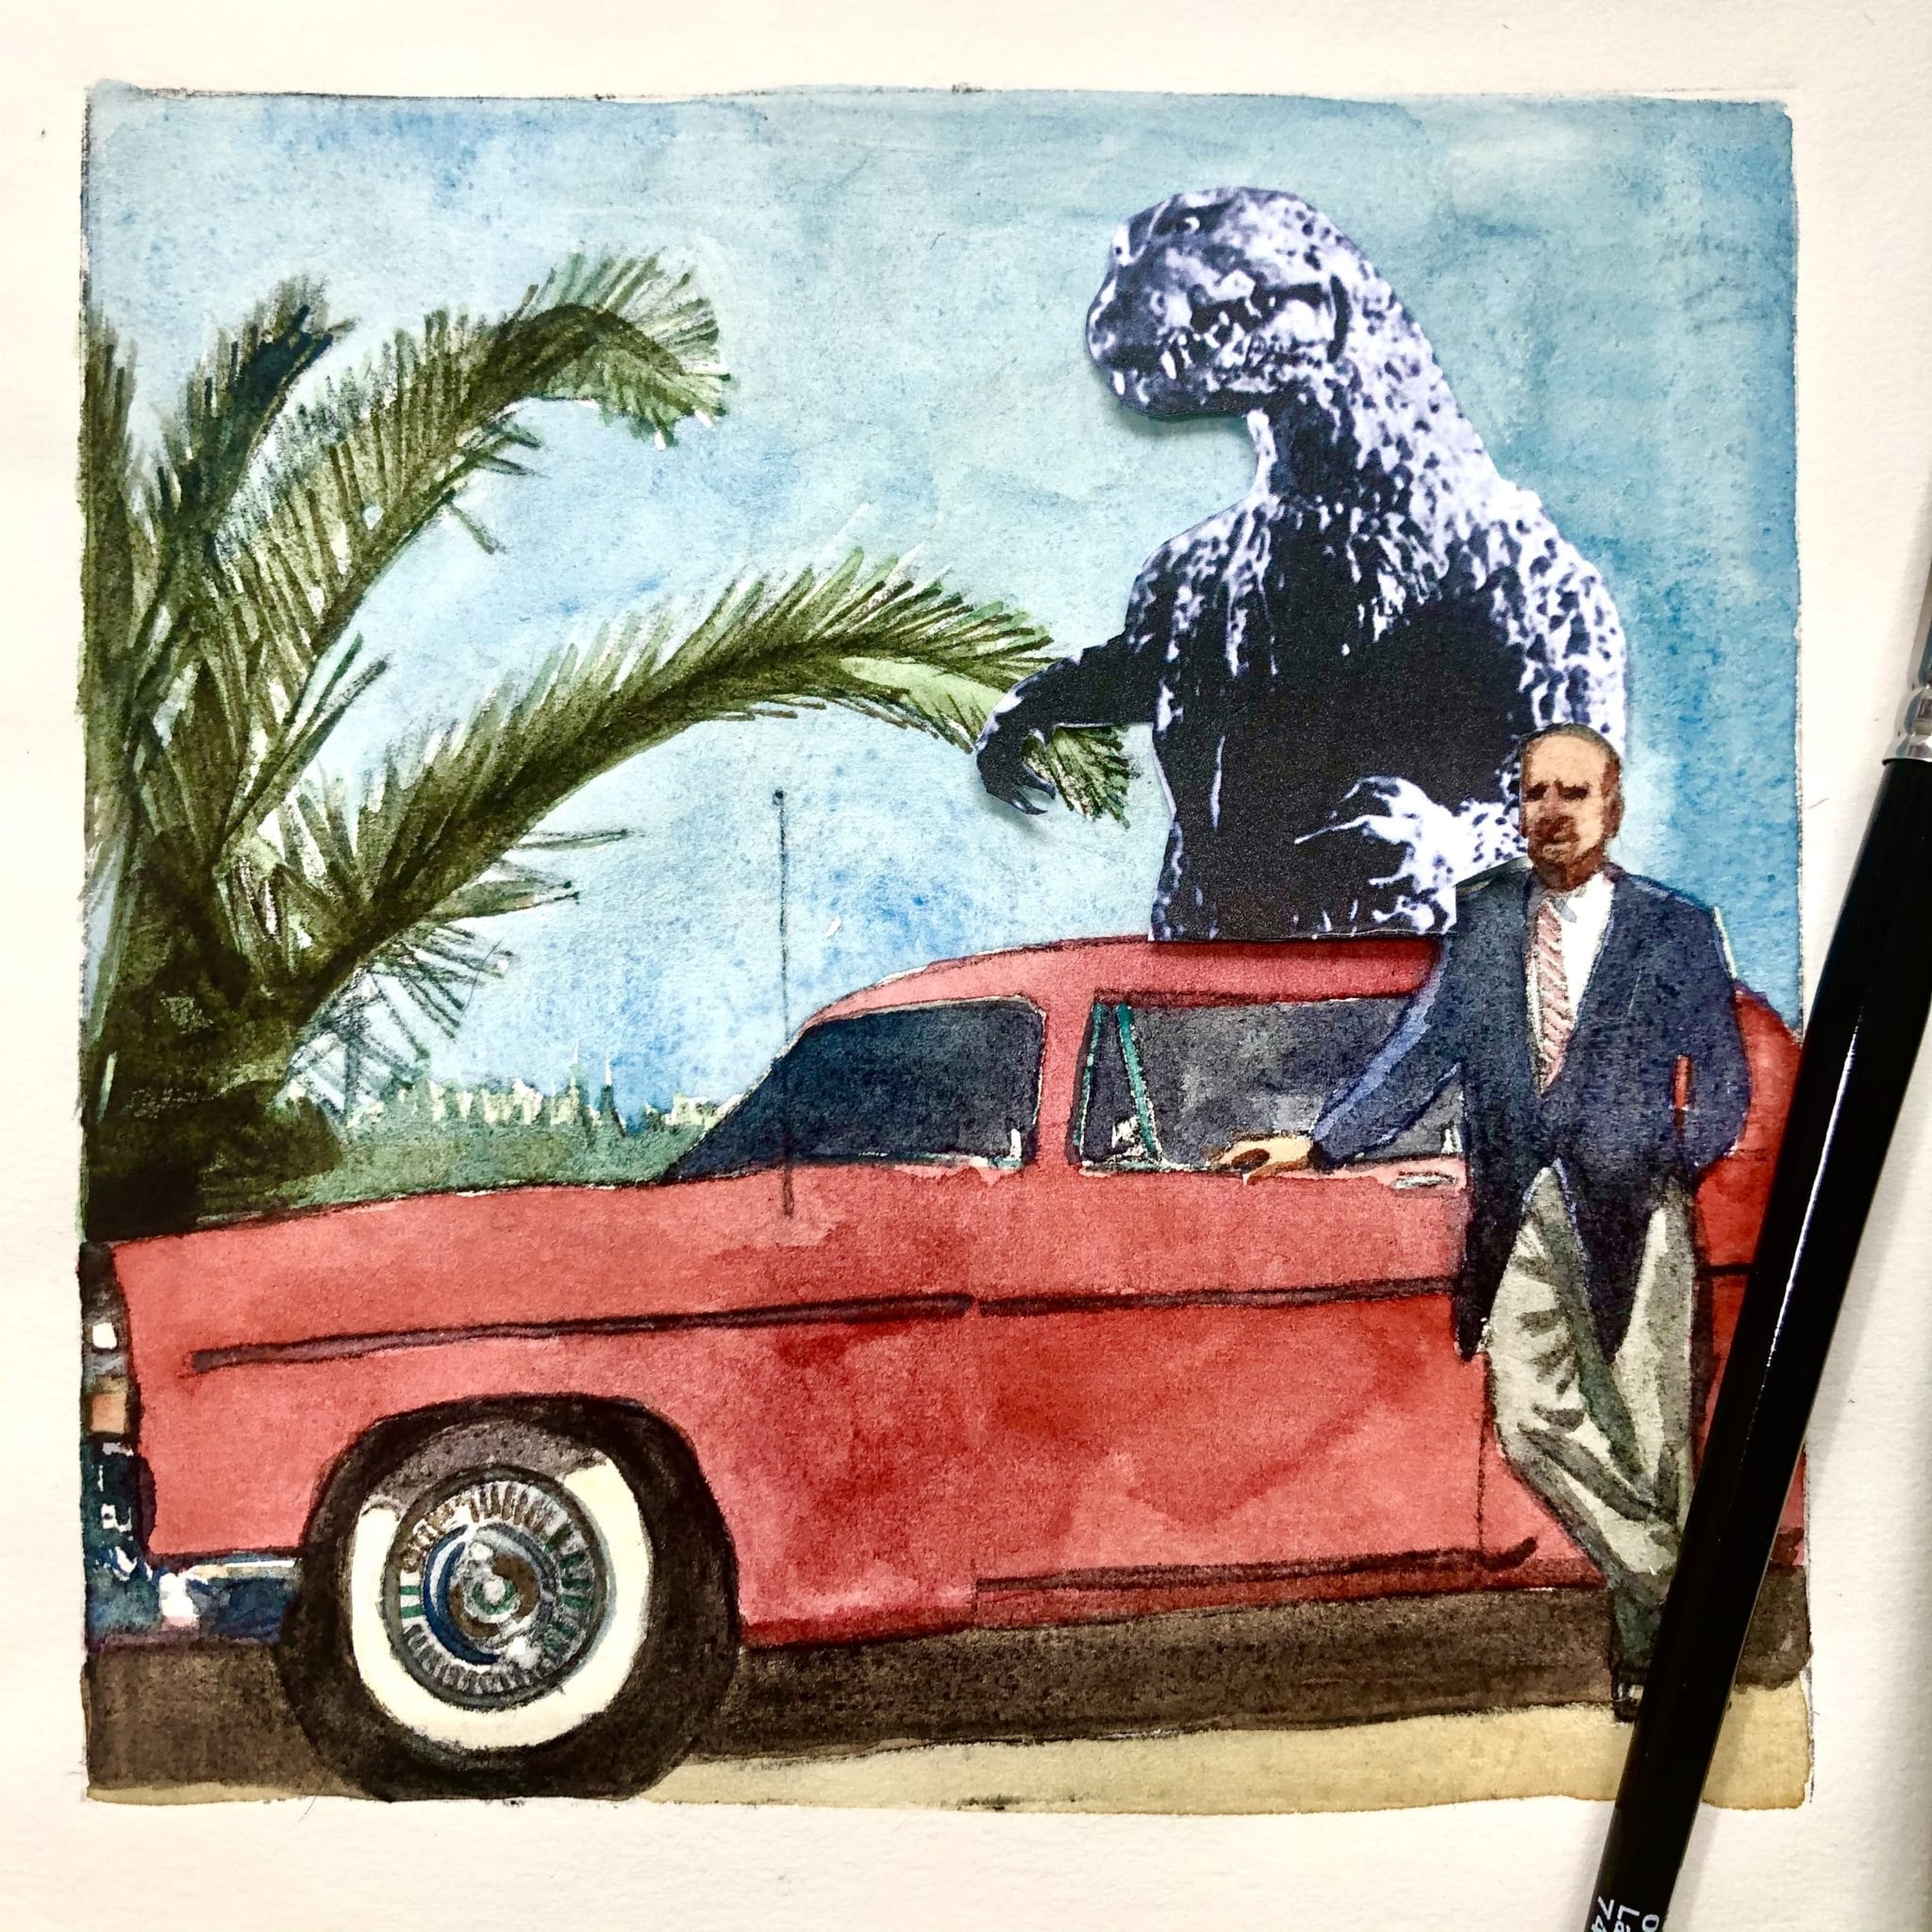 Drypoint engraving of a man with a Chrysler 300 and Godzilla